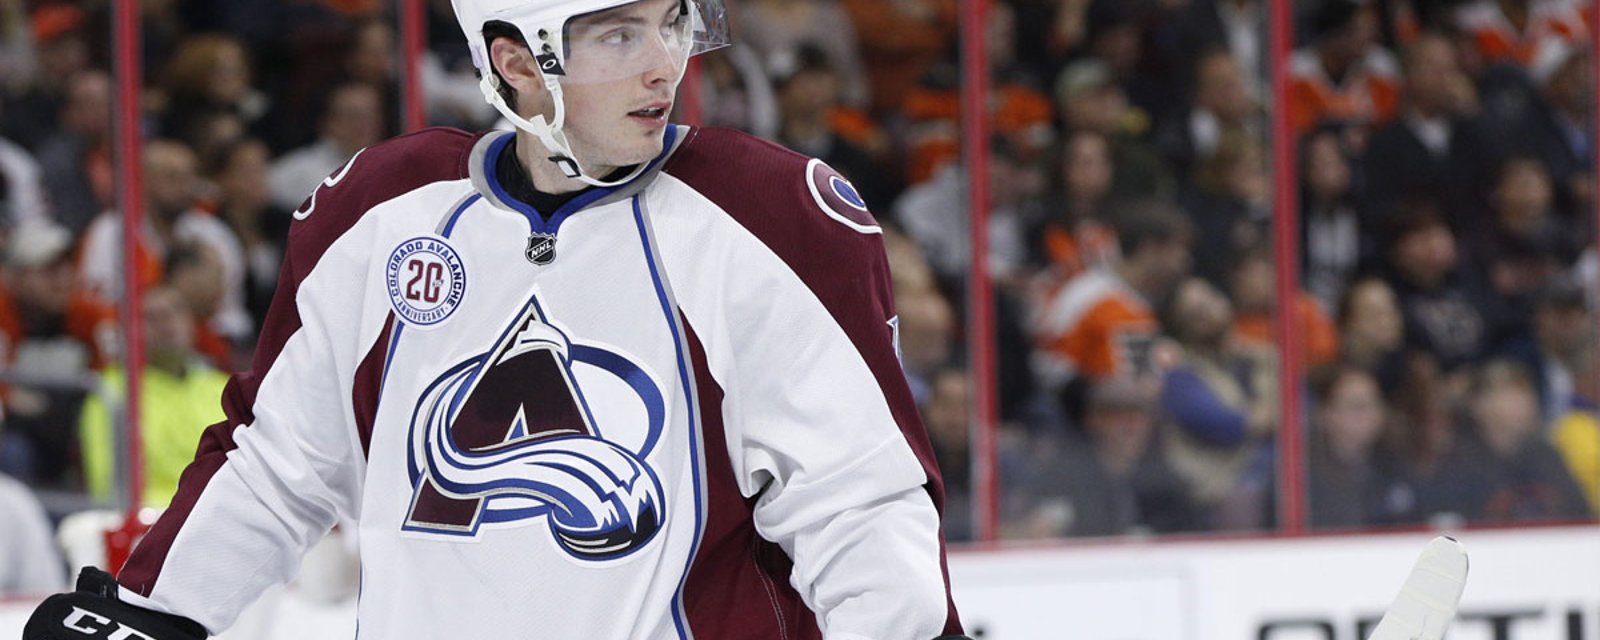 This team “is not a good fit for Duchene!” NHL insider reveals